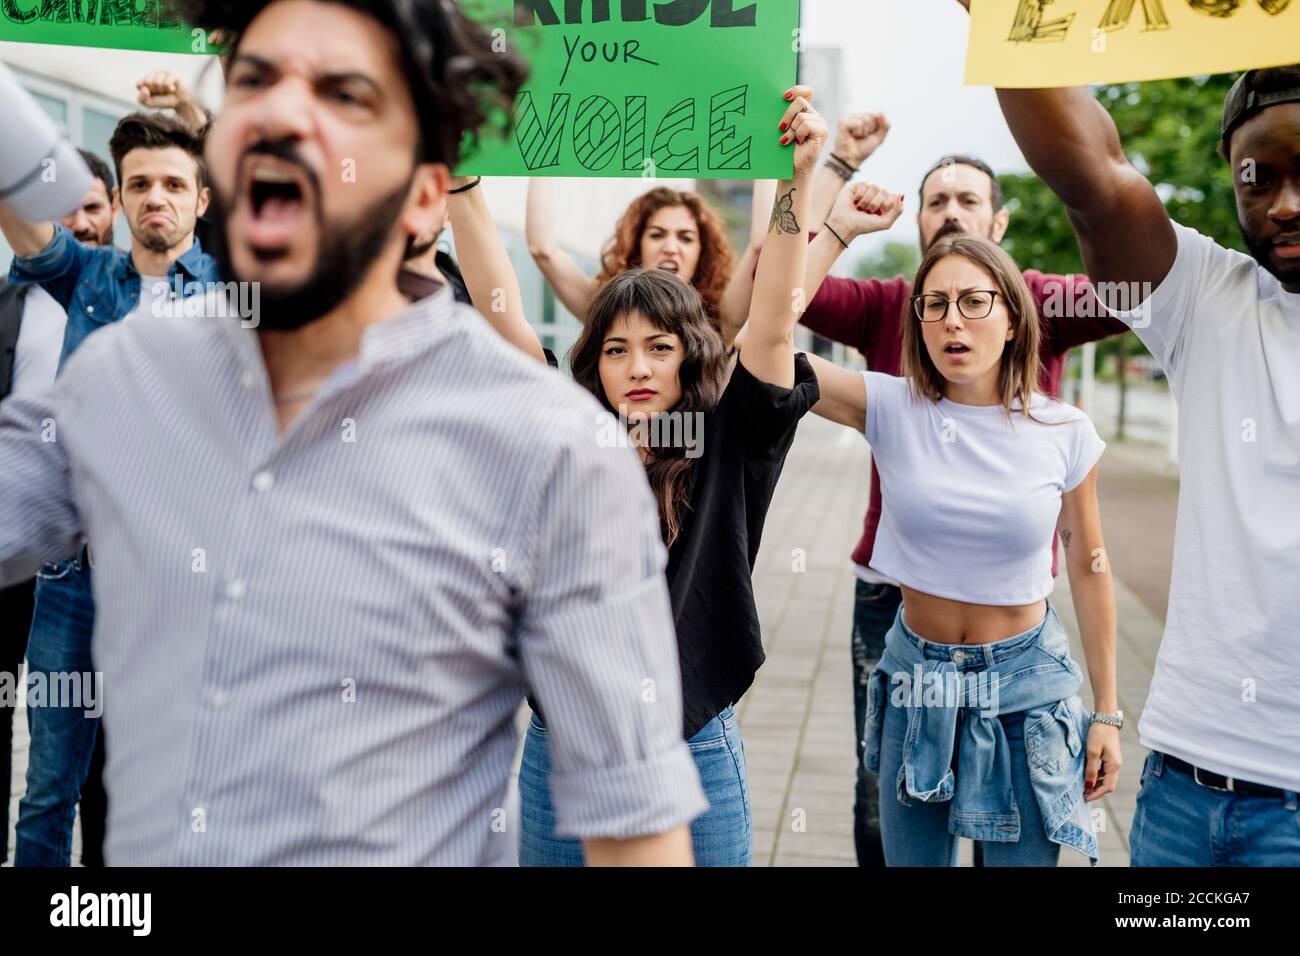 Multi ethnic people with banners protesting on street in city Stock Photo